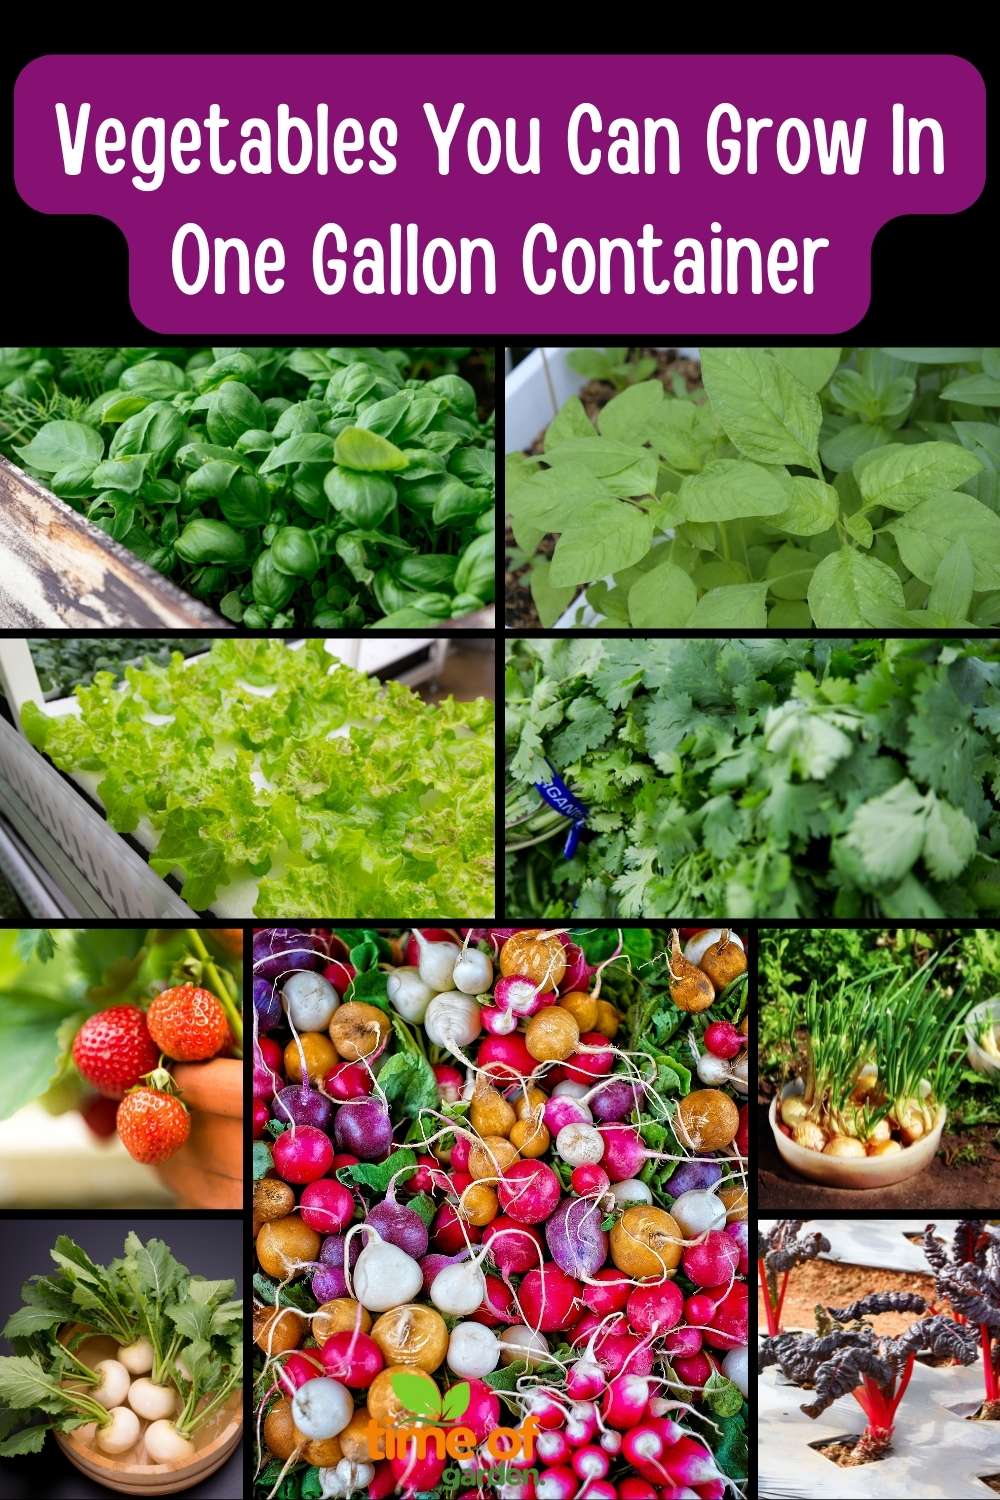 Vegetables You Can Grow In One Gallon Container